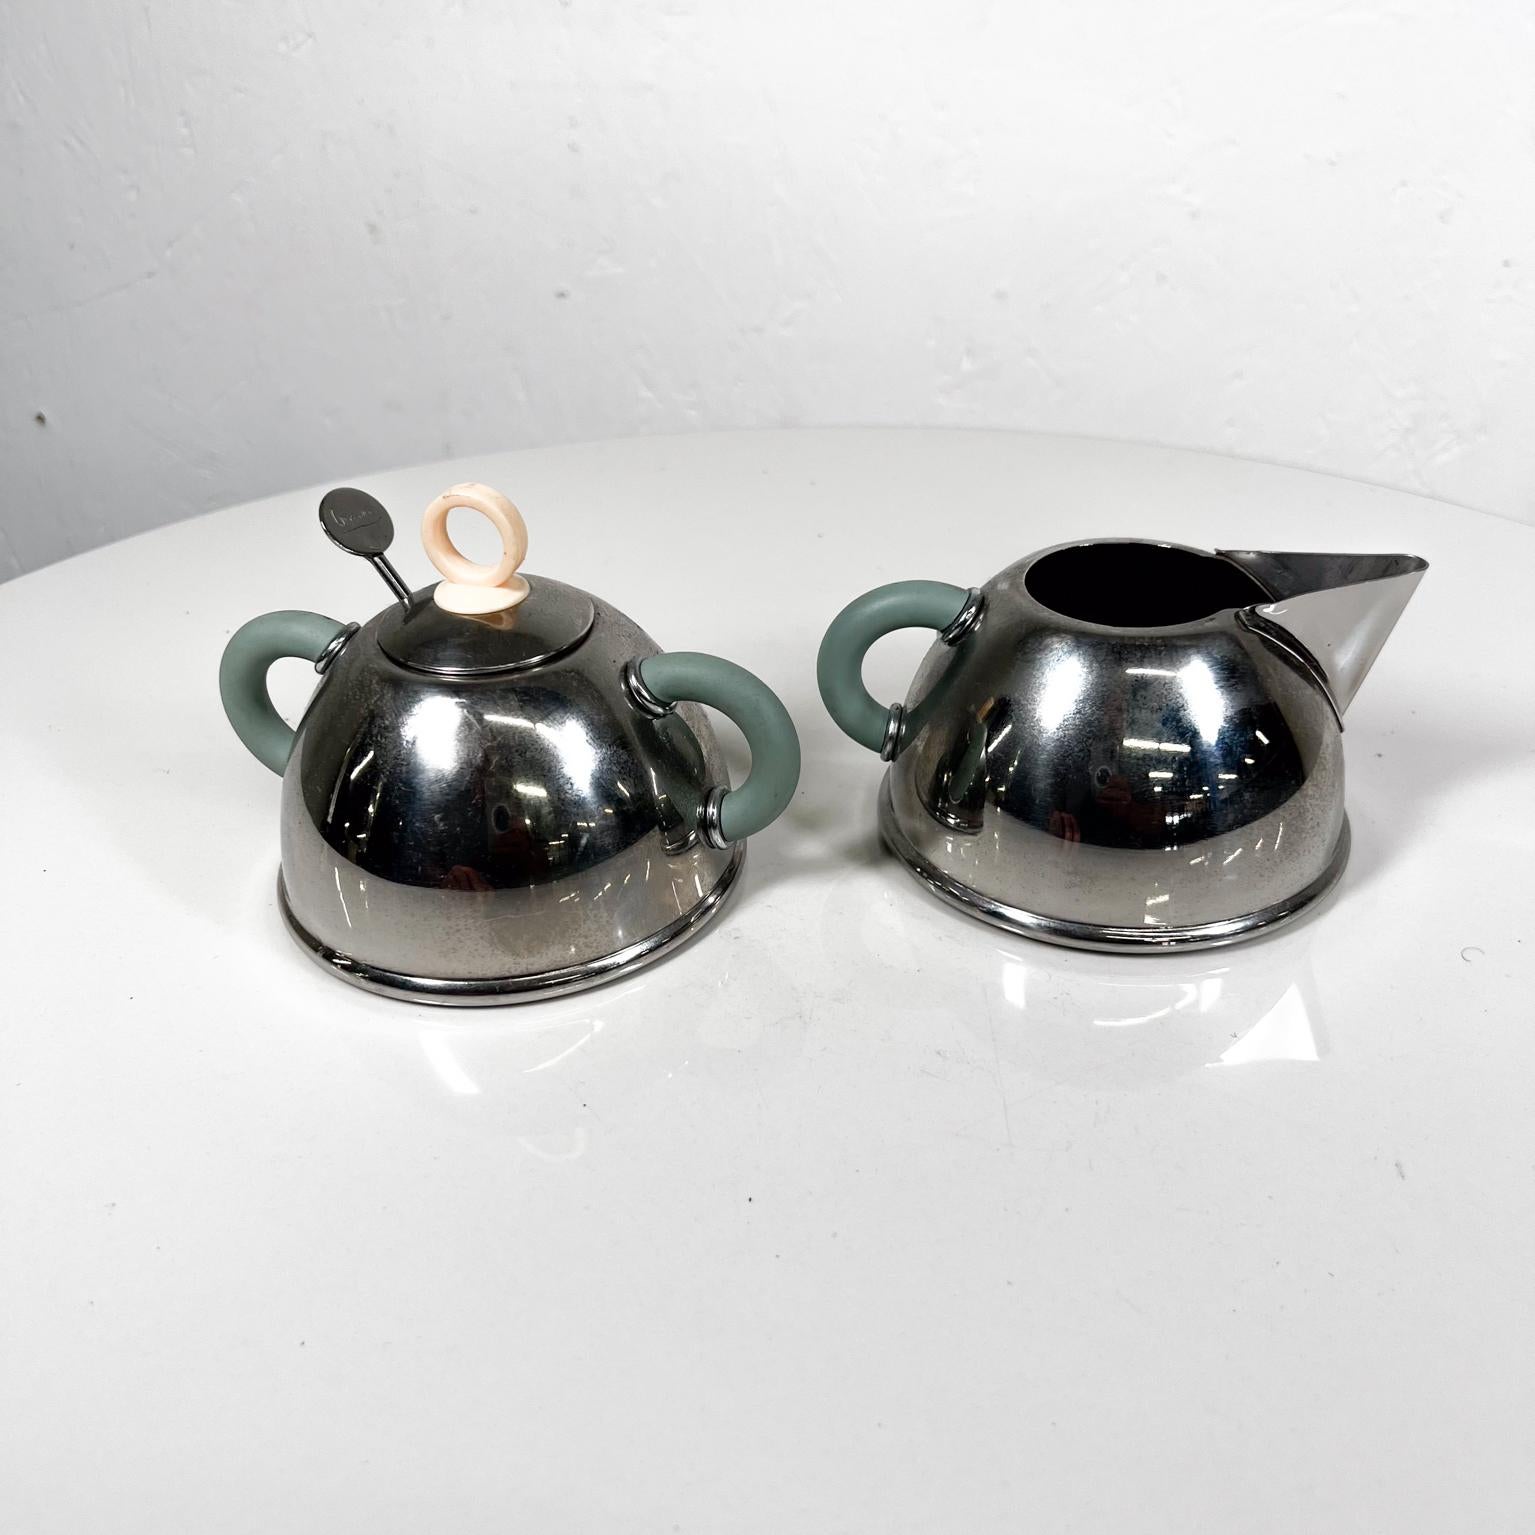 Stainless Steel 1985 Iconic Alessi Sugar Bowl + Creamer designed by Michael Graves For Sale